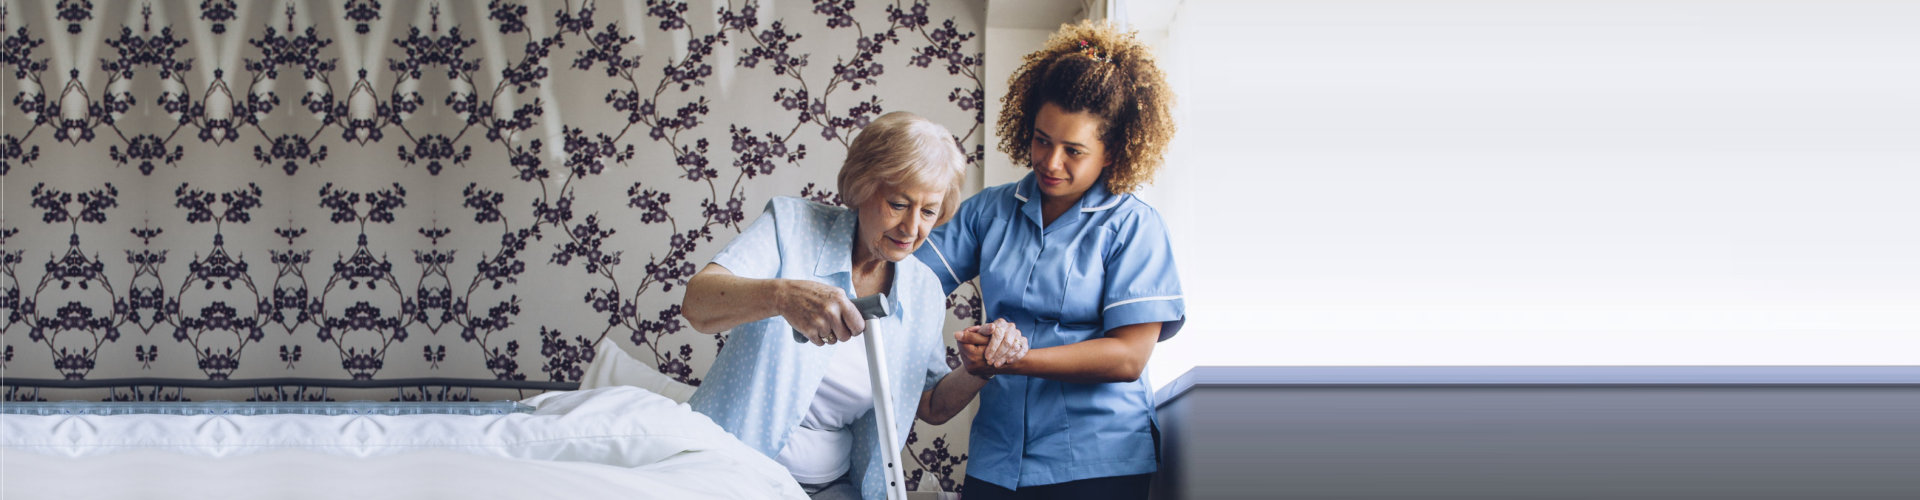 caregiver assisting elder woman in standing up concept